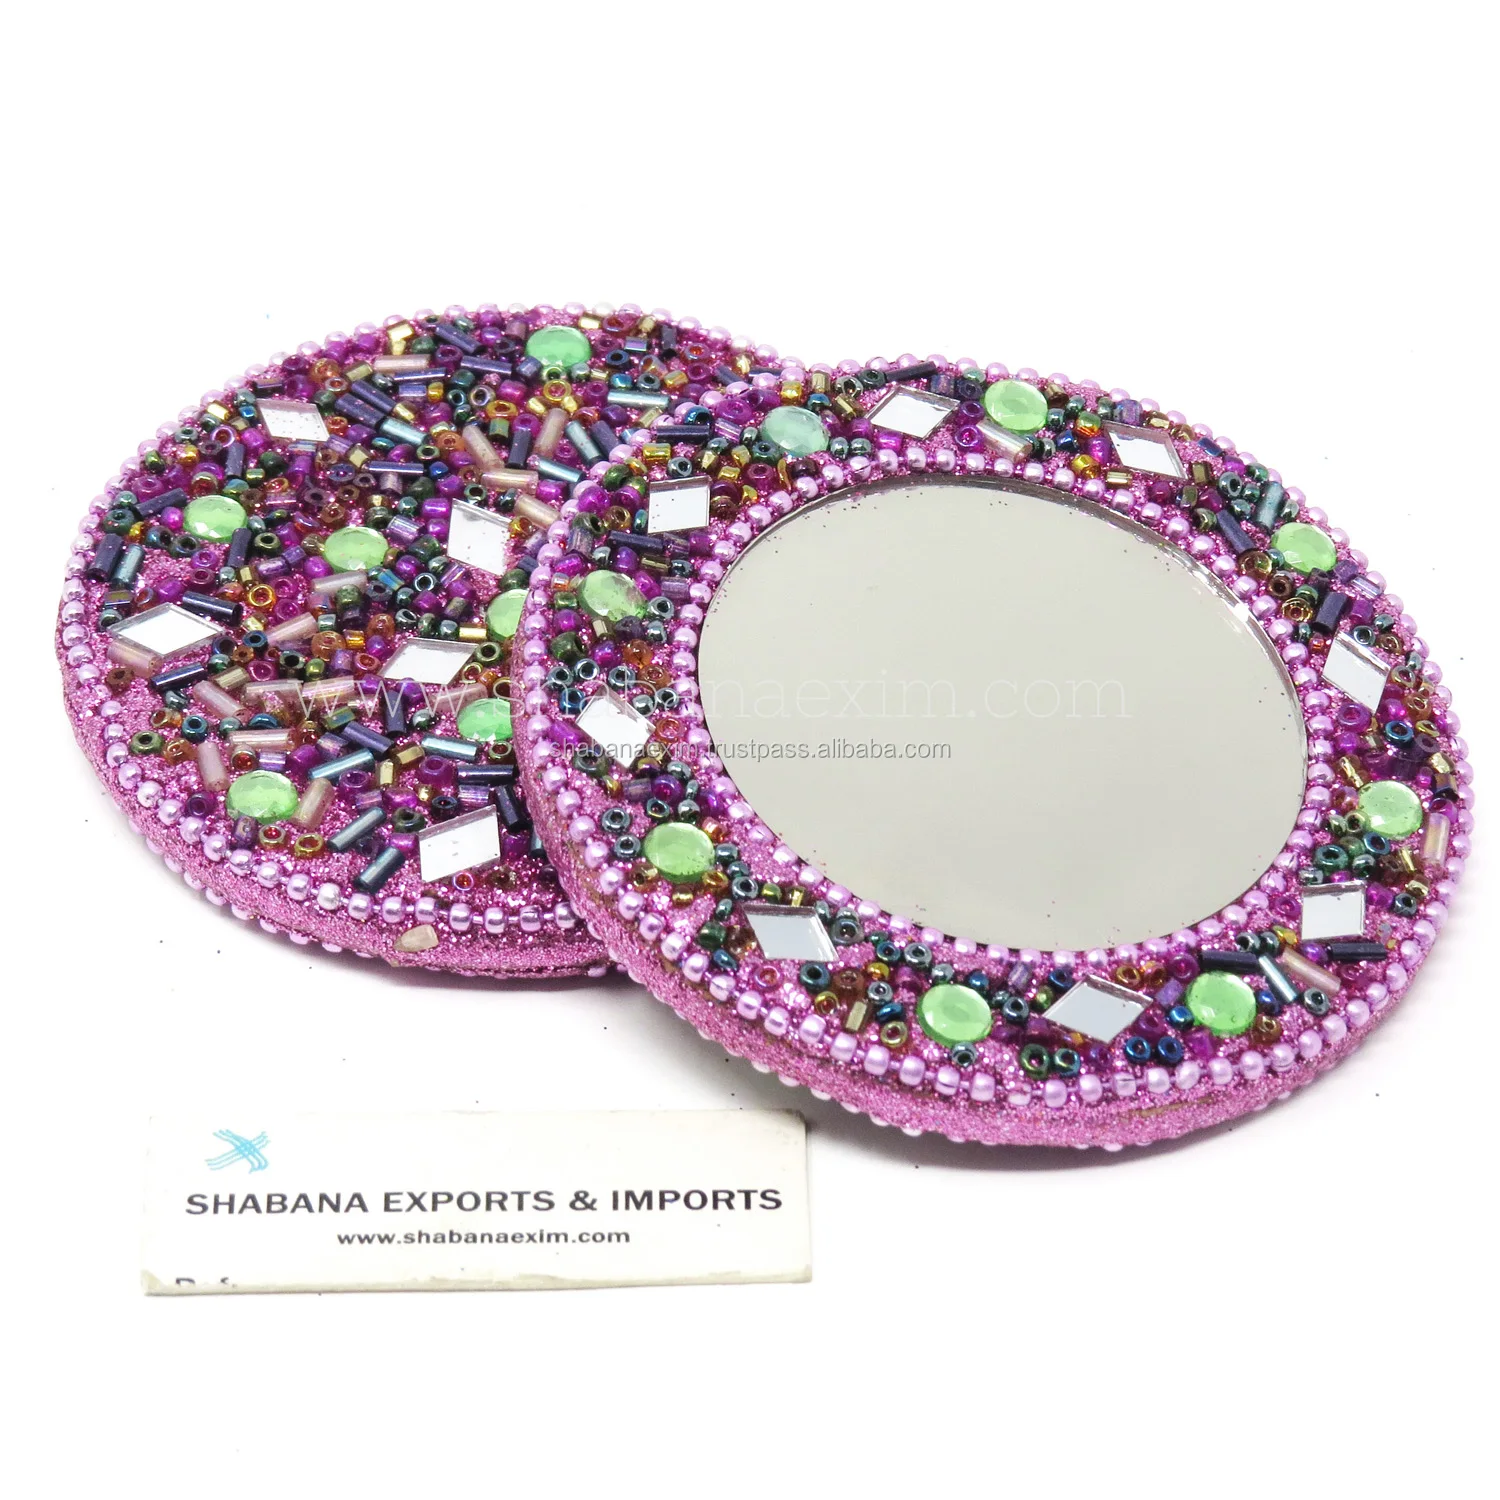 Buy Compact Magnifying Mirror 5x - Pack of 2 Online at Best Price in India